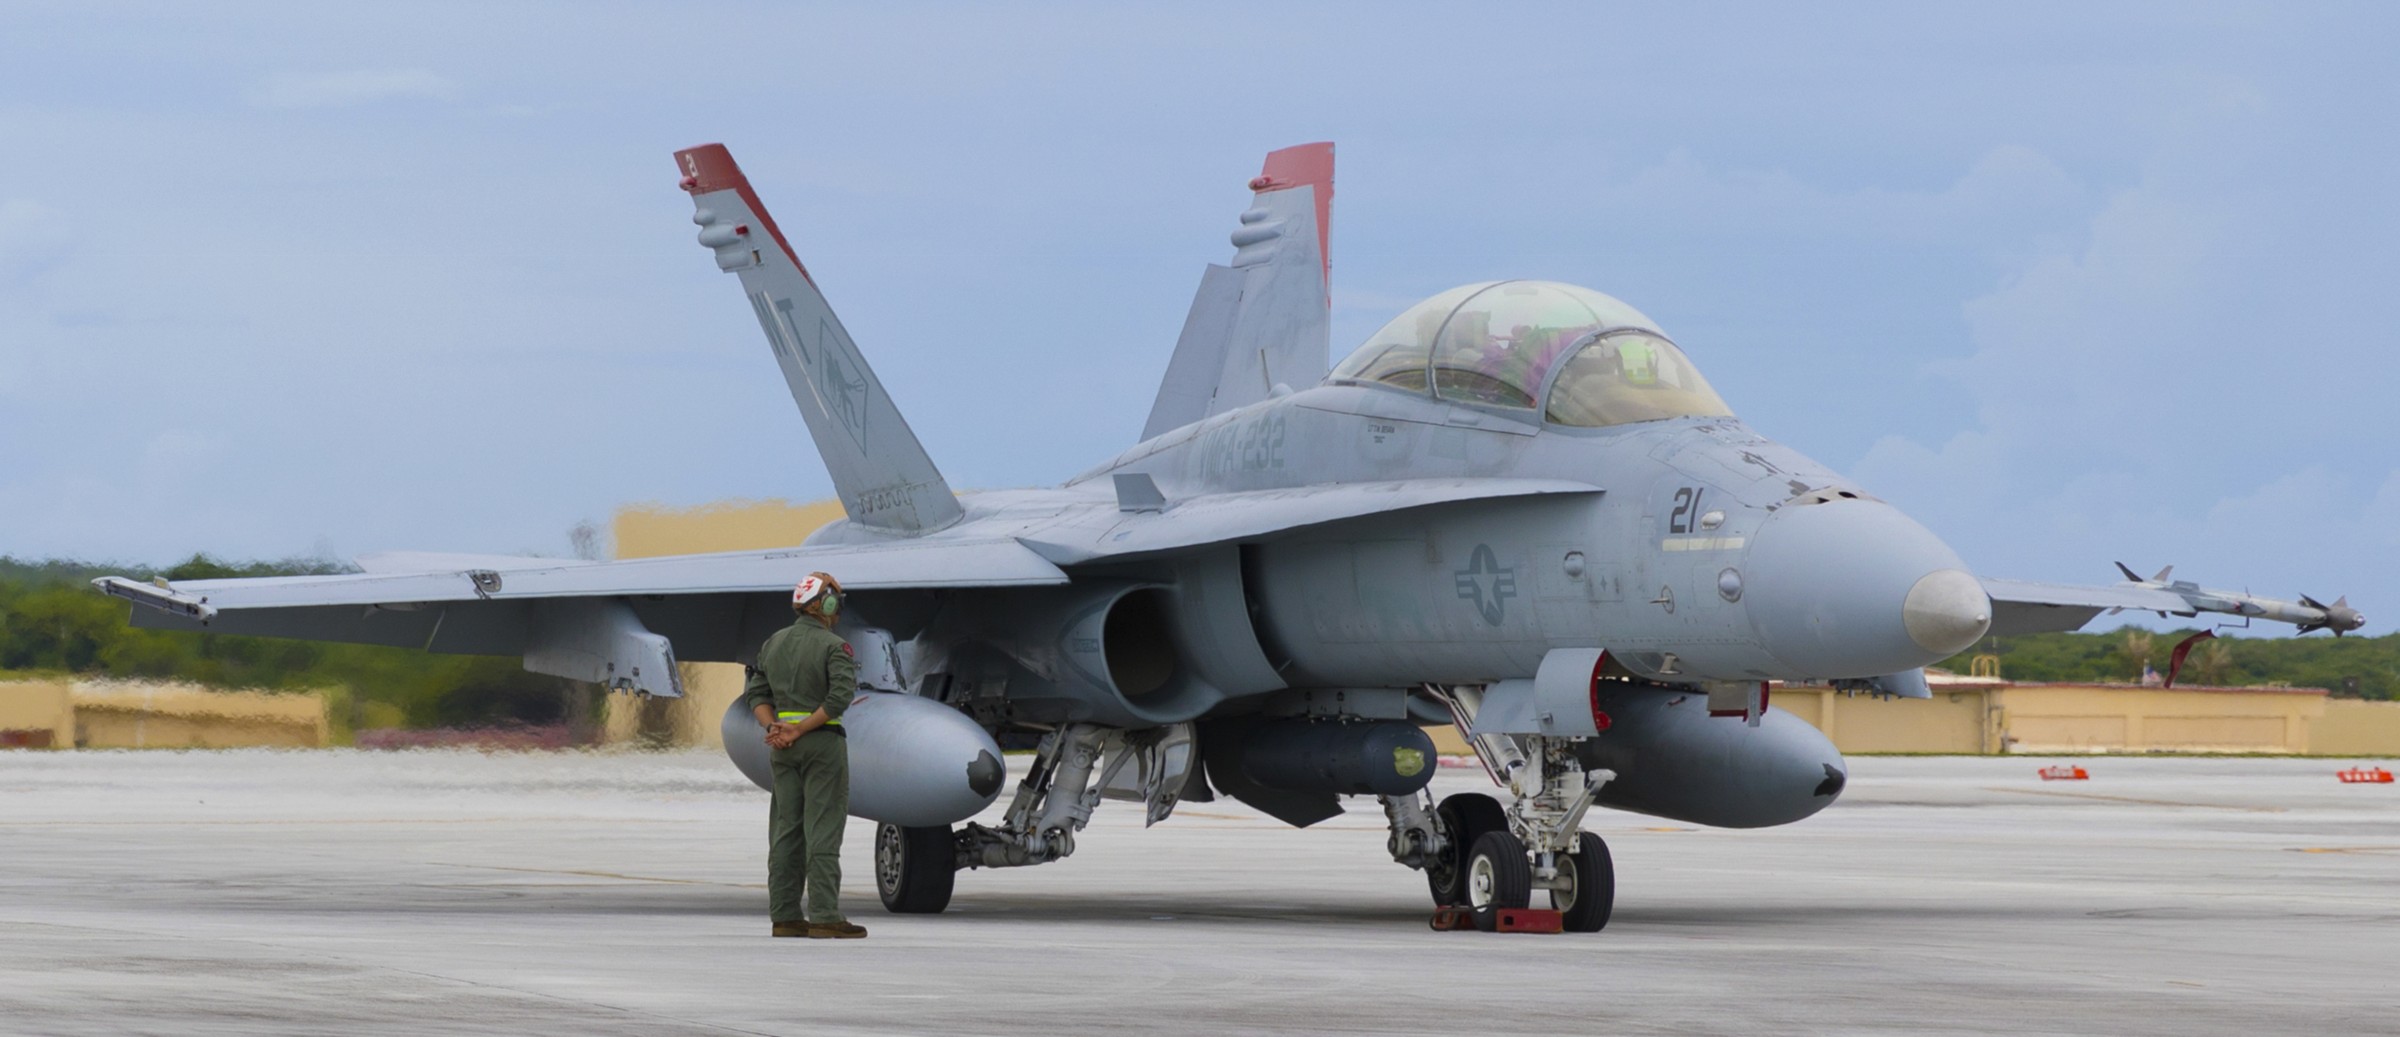 vmfa-232 red devils marine fighter attack squadron usmc f/a-18d hornet 220 andersen air force base guam